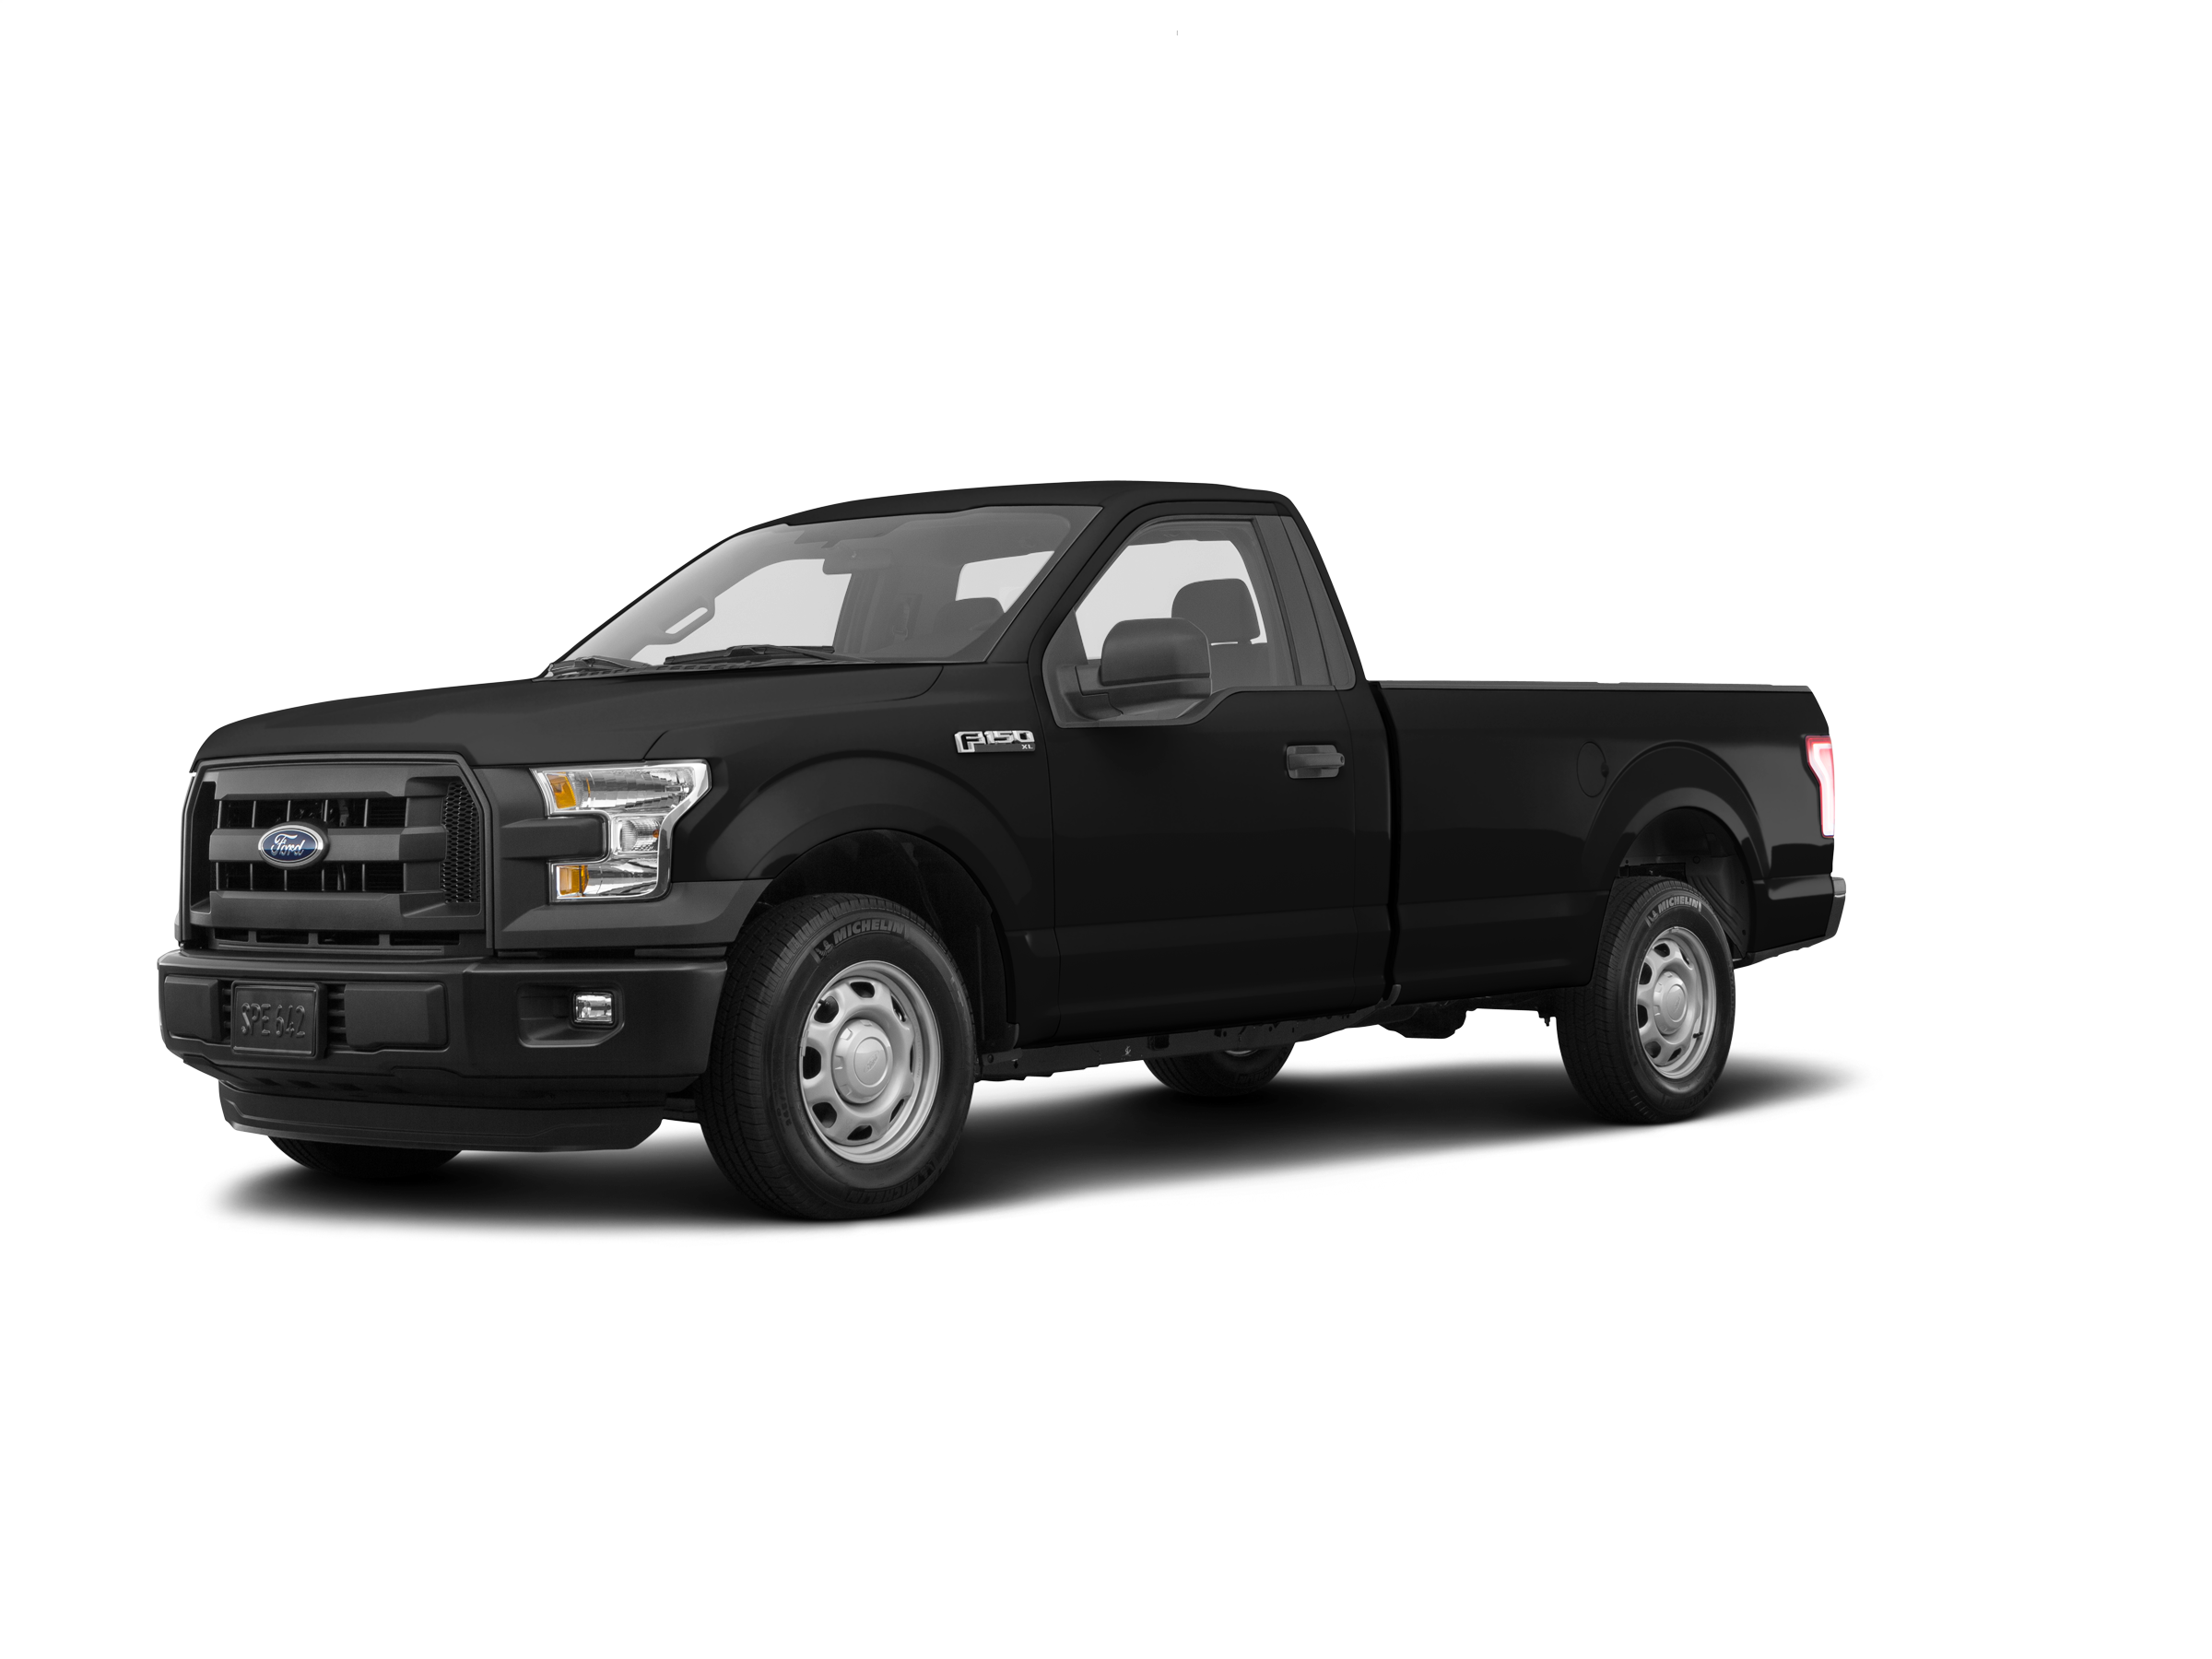 2017 Ford F150 Regular Cab Price, Value, Ratings & Reviews